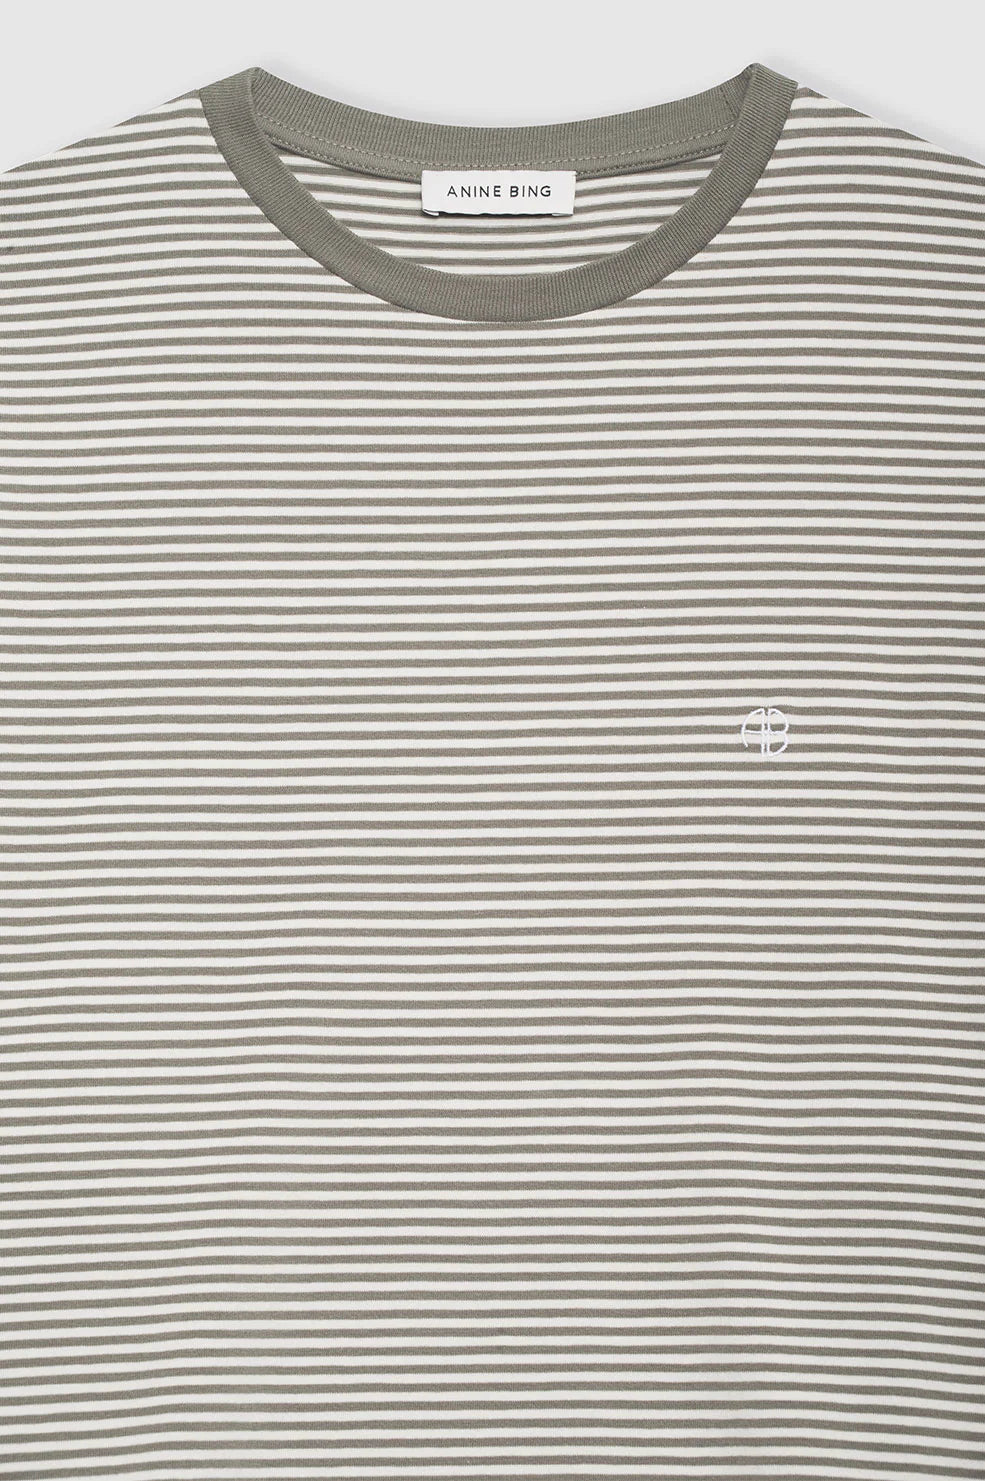 Bo Tee in Olive and Ivory Stripe